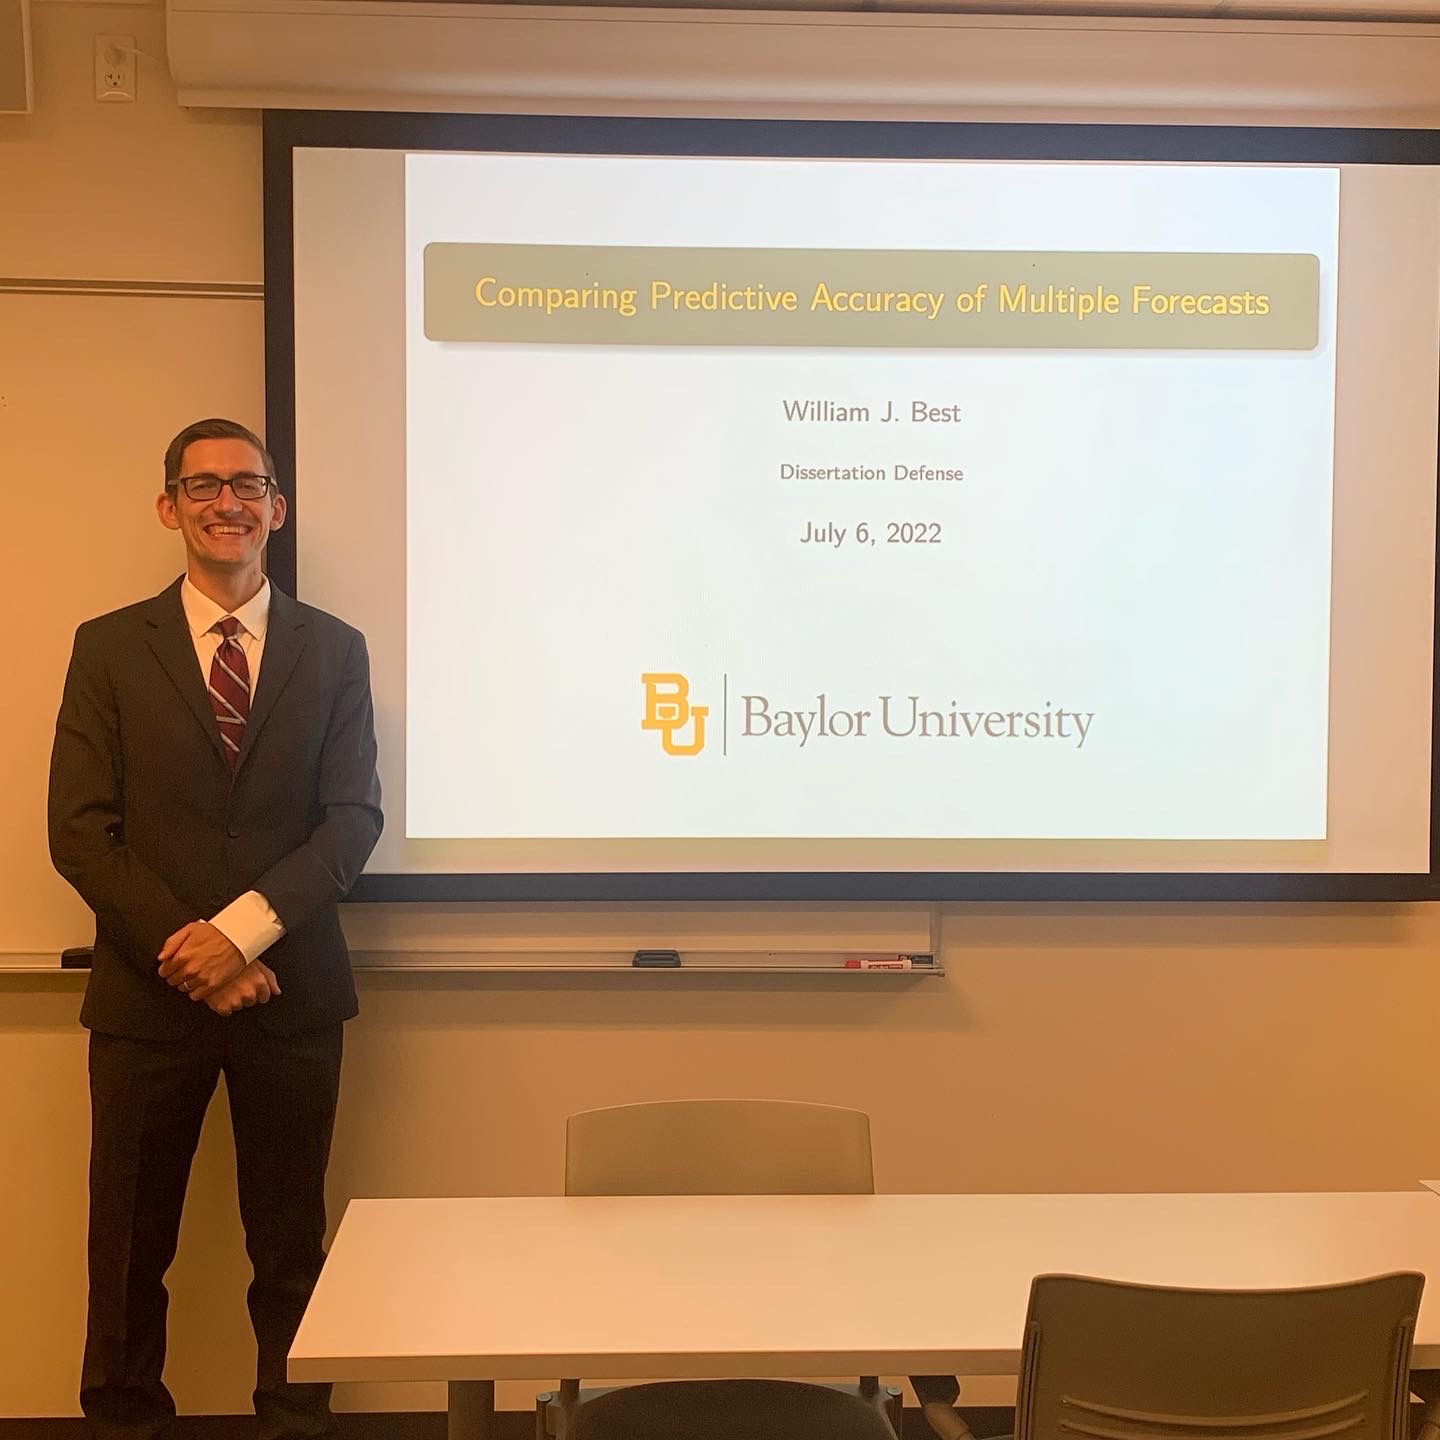 Congratulations to Dr. Will Best